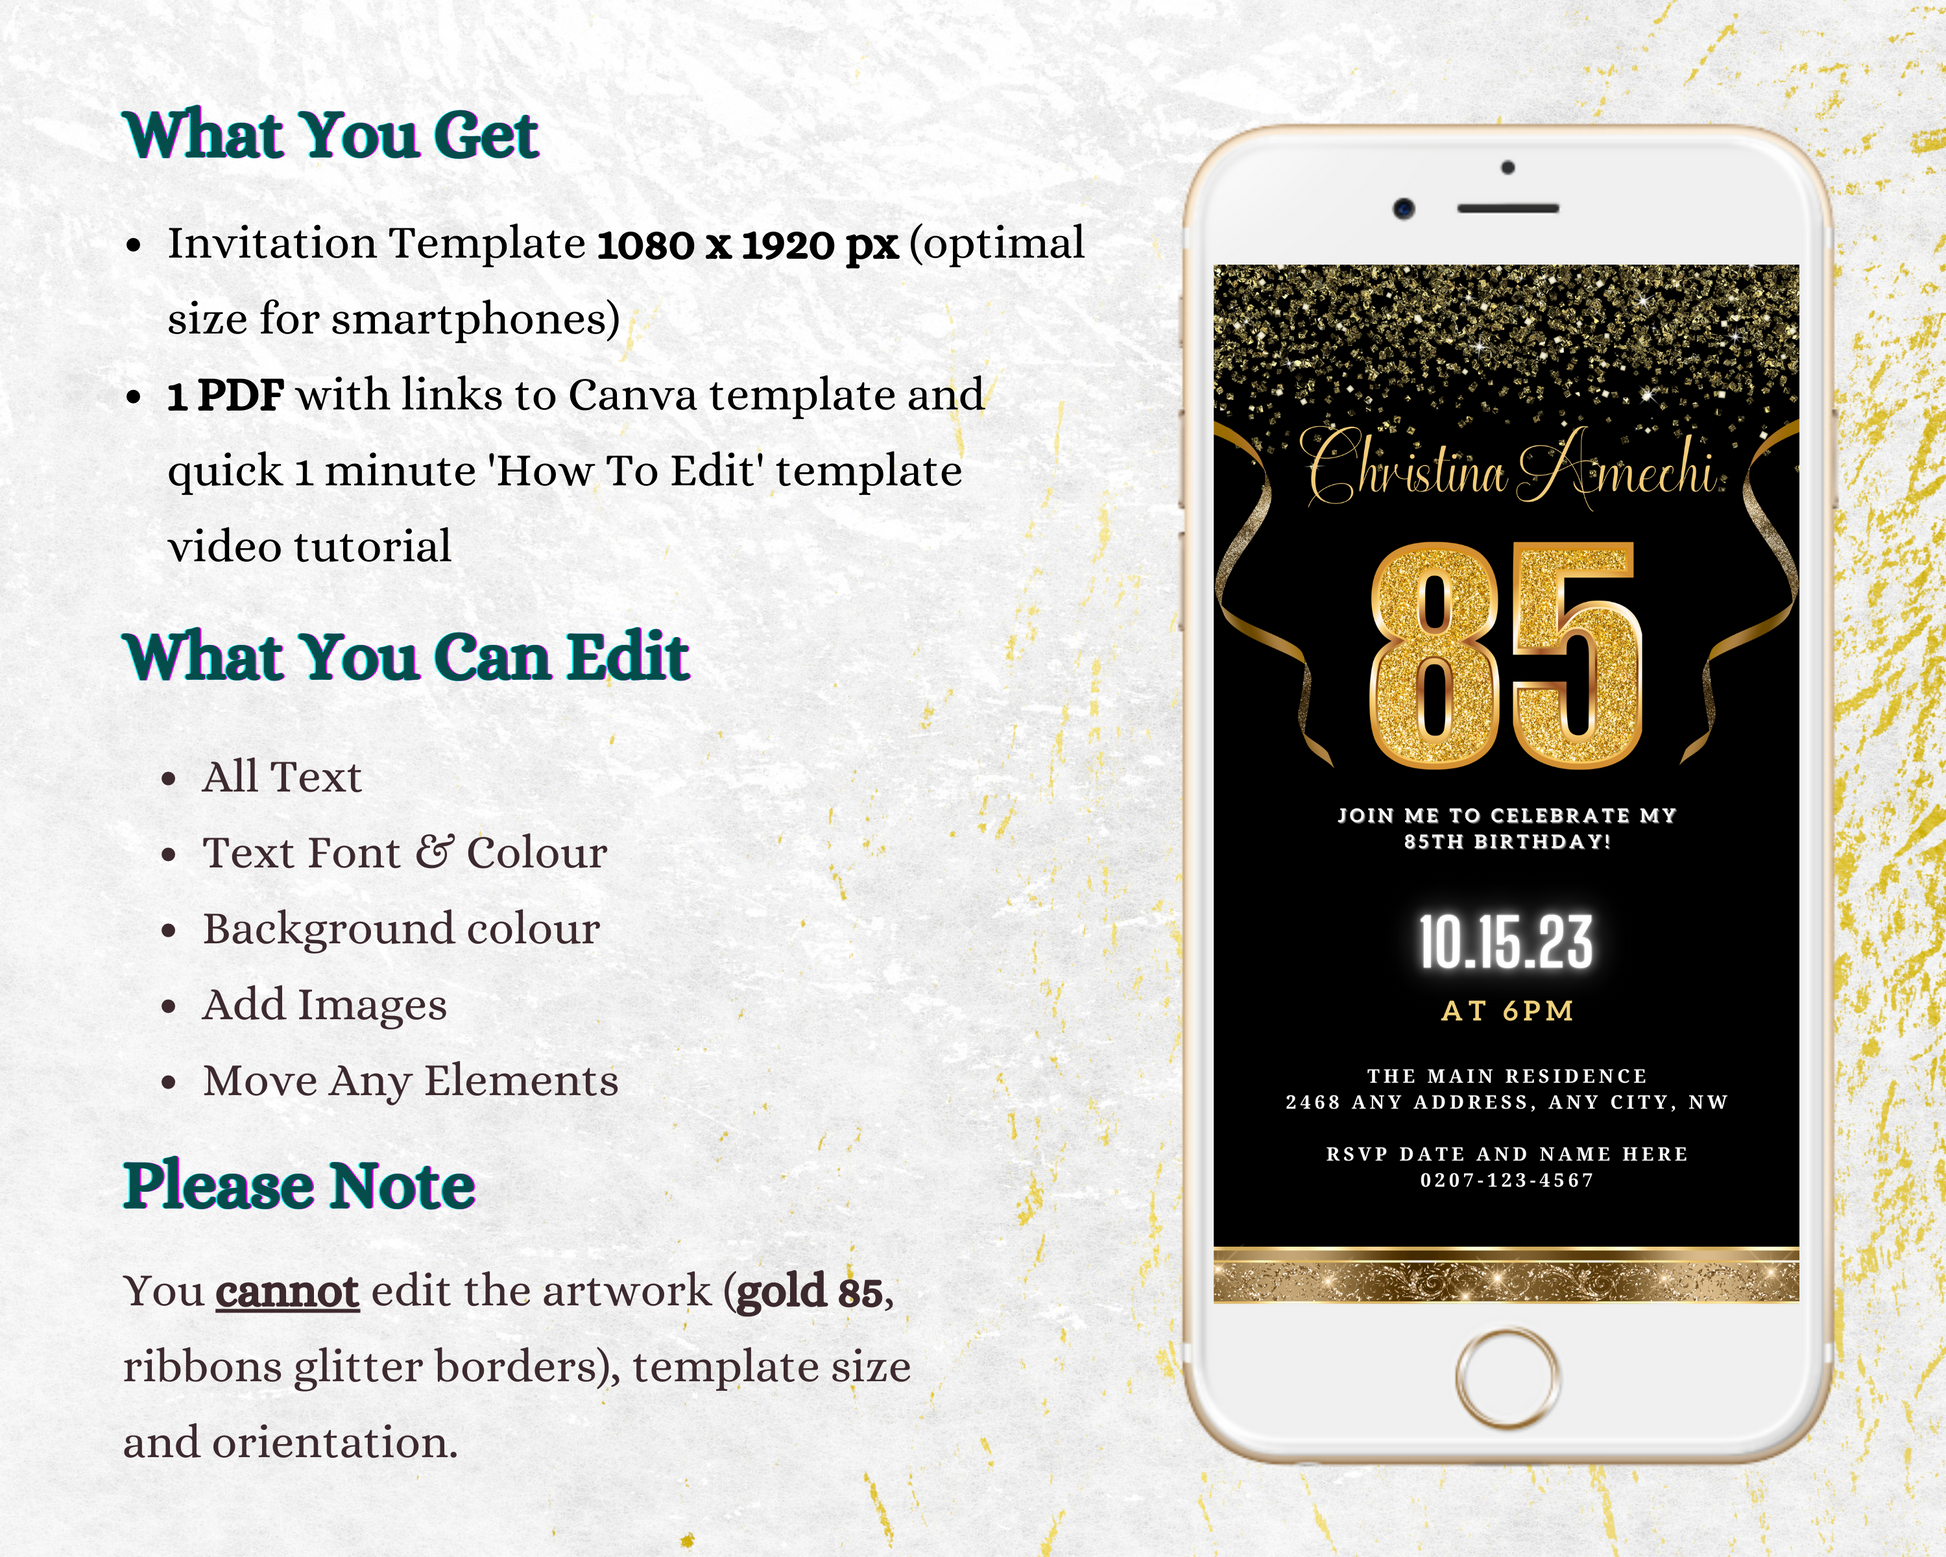 Customisable Digital Black Gold Confetti 85th Birthday Evite for smartphones, showing editable text and design elements on the phone screen. Instantly downloadable and editable via Canva.